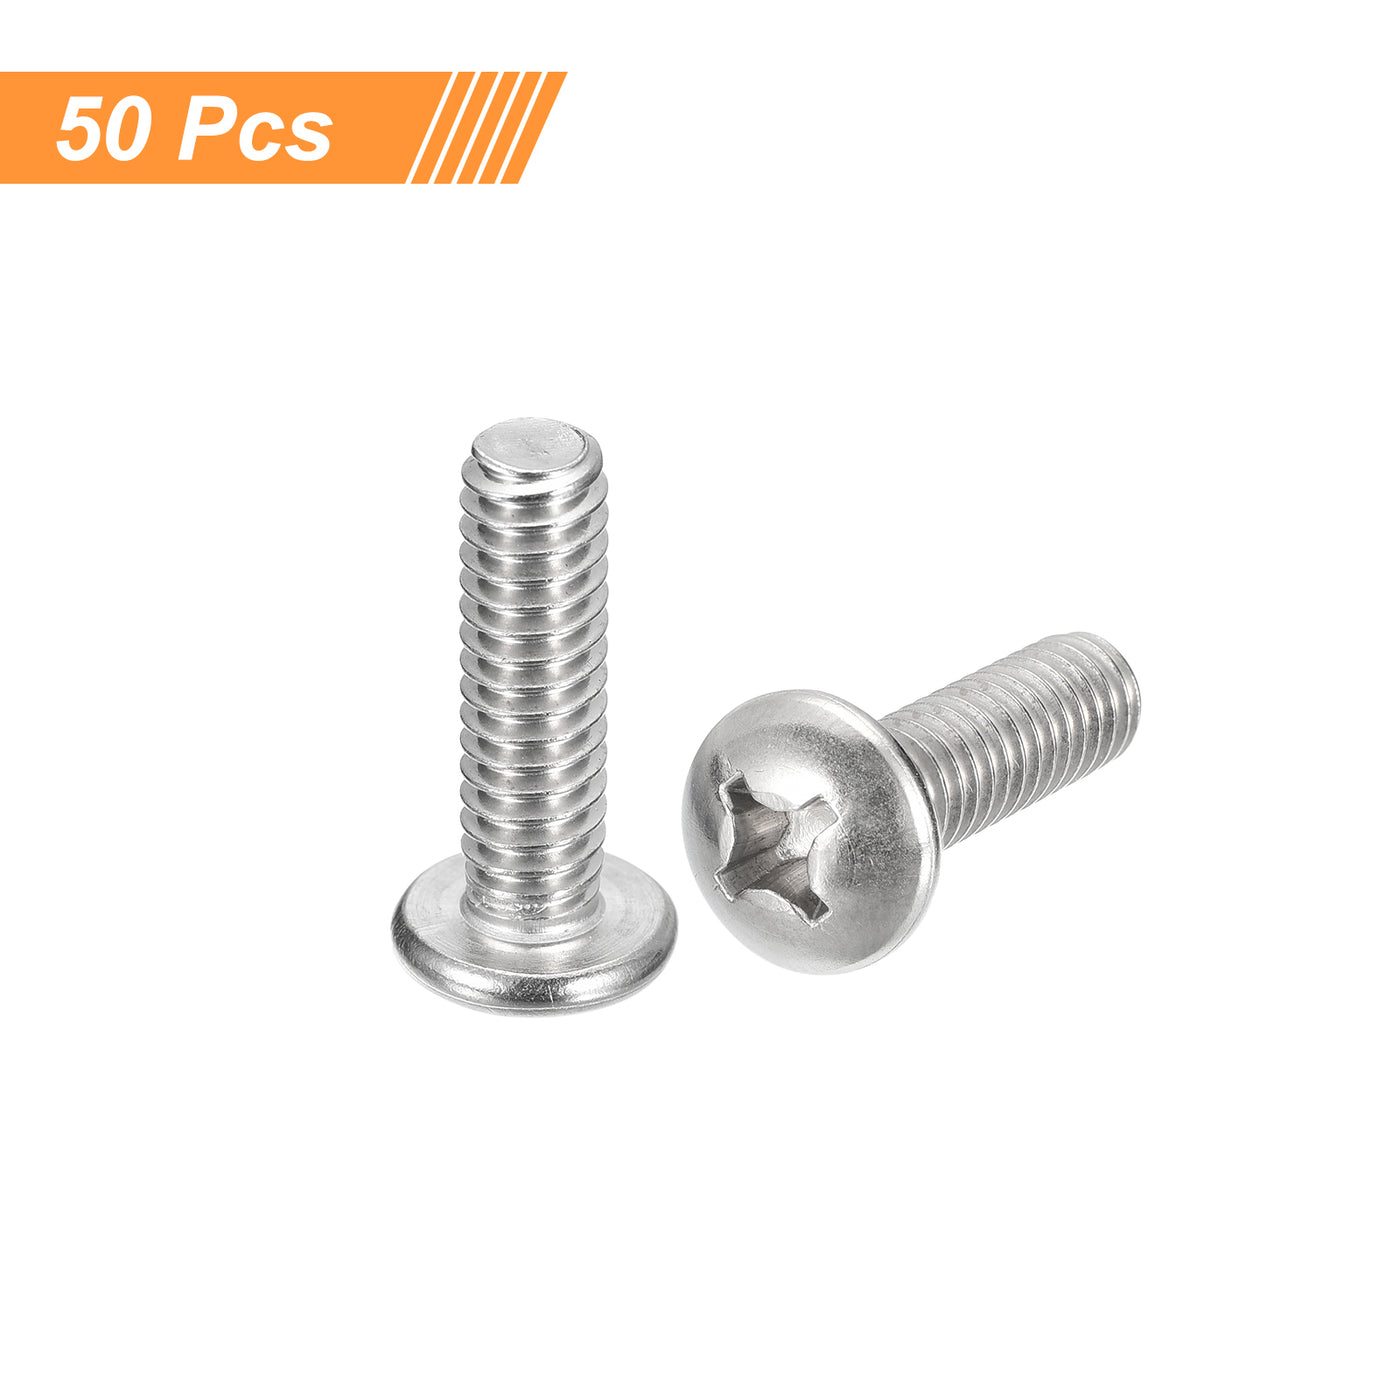 uxcell Uxcell 1/4-20x7/8" Pan Head Machine Screws, Stainless Steel 18-8 Screw, Pack of 50